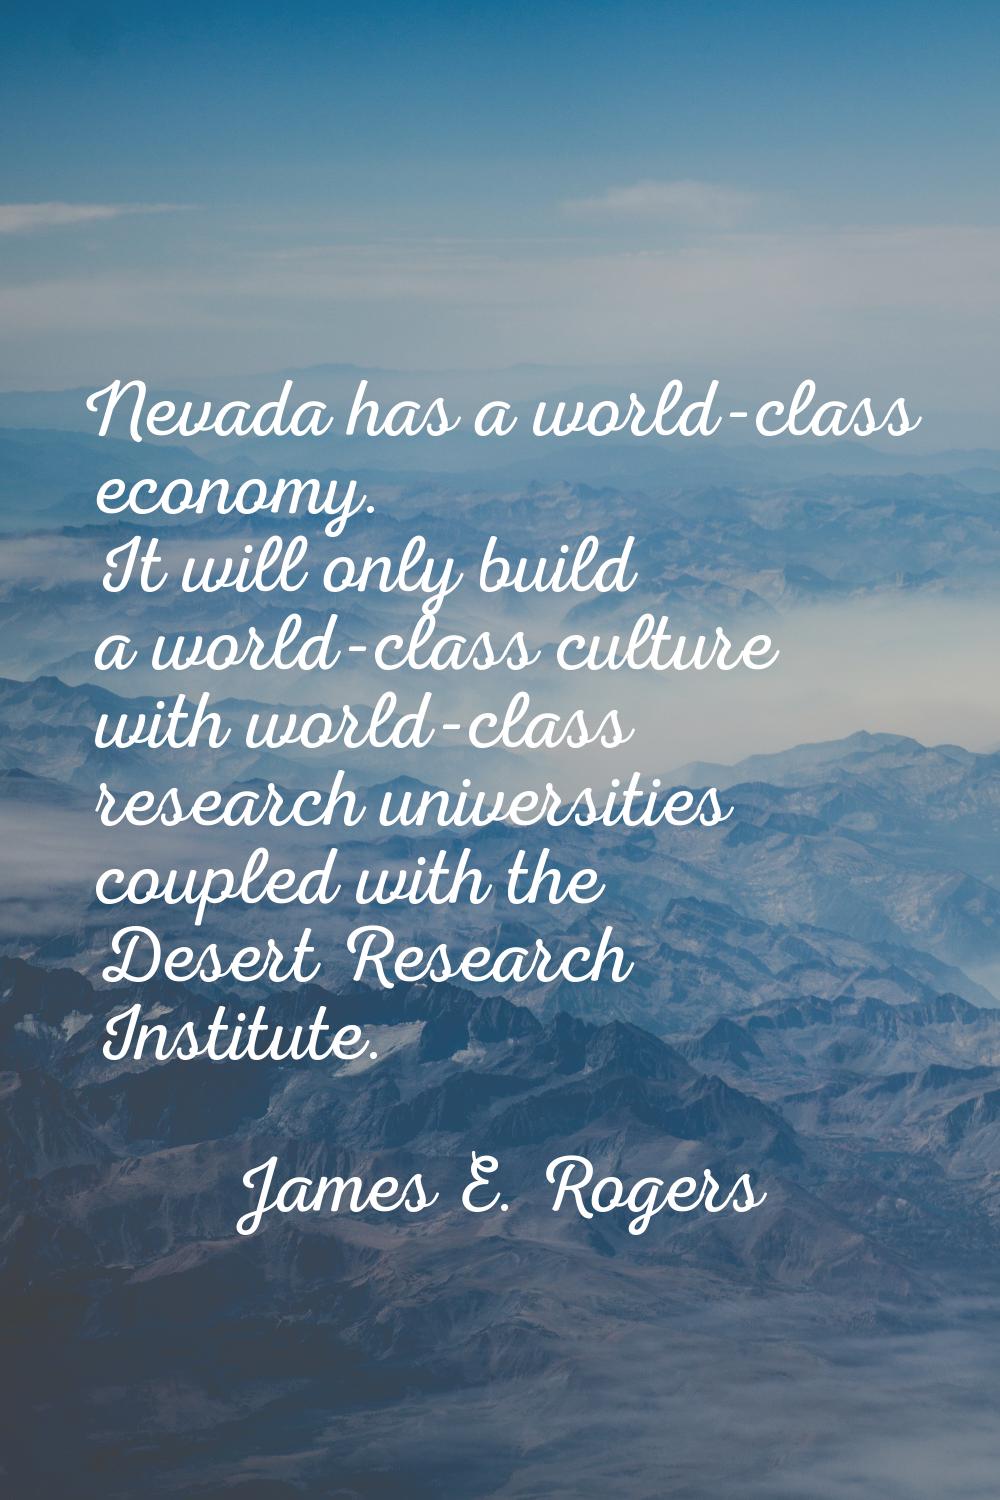 Nevada has a world-class economy. It will only build a world-class culture with world-class researc